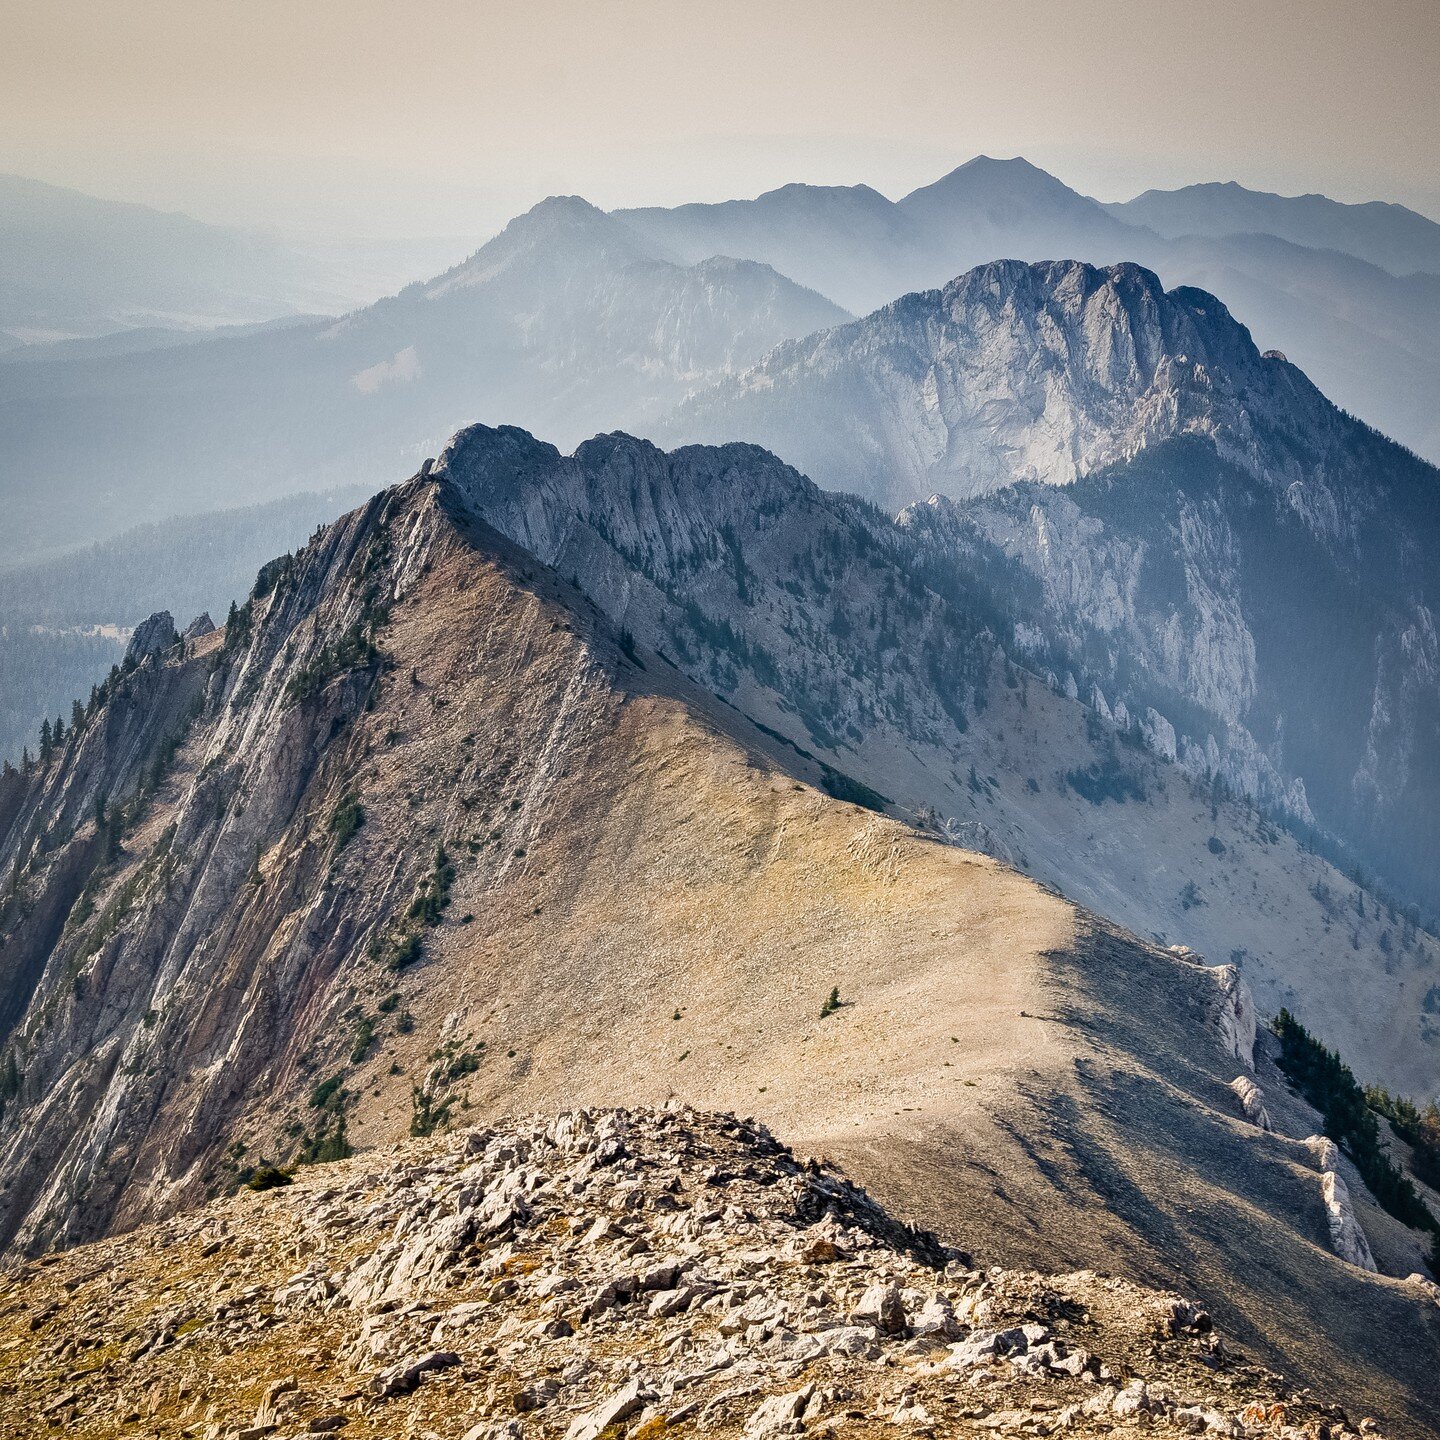 Bridger Ridge as seen from the top of Naya Nuki Peak. Taken in 2013 during a Bridger Ridge hike from Fairy Lake back to the &quot;M&quot; parking lot. 

Over the years, this has definitely been one of my most popular photos. It's been used on the Big